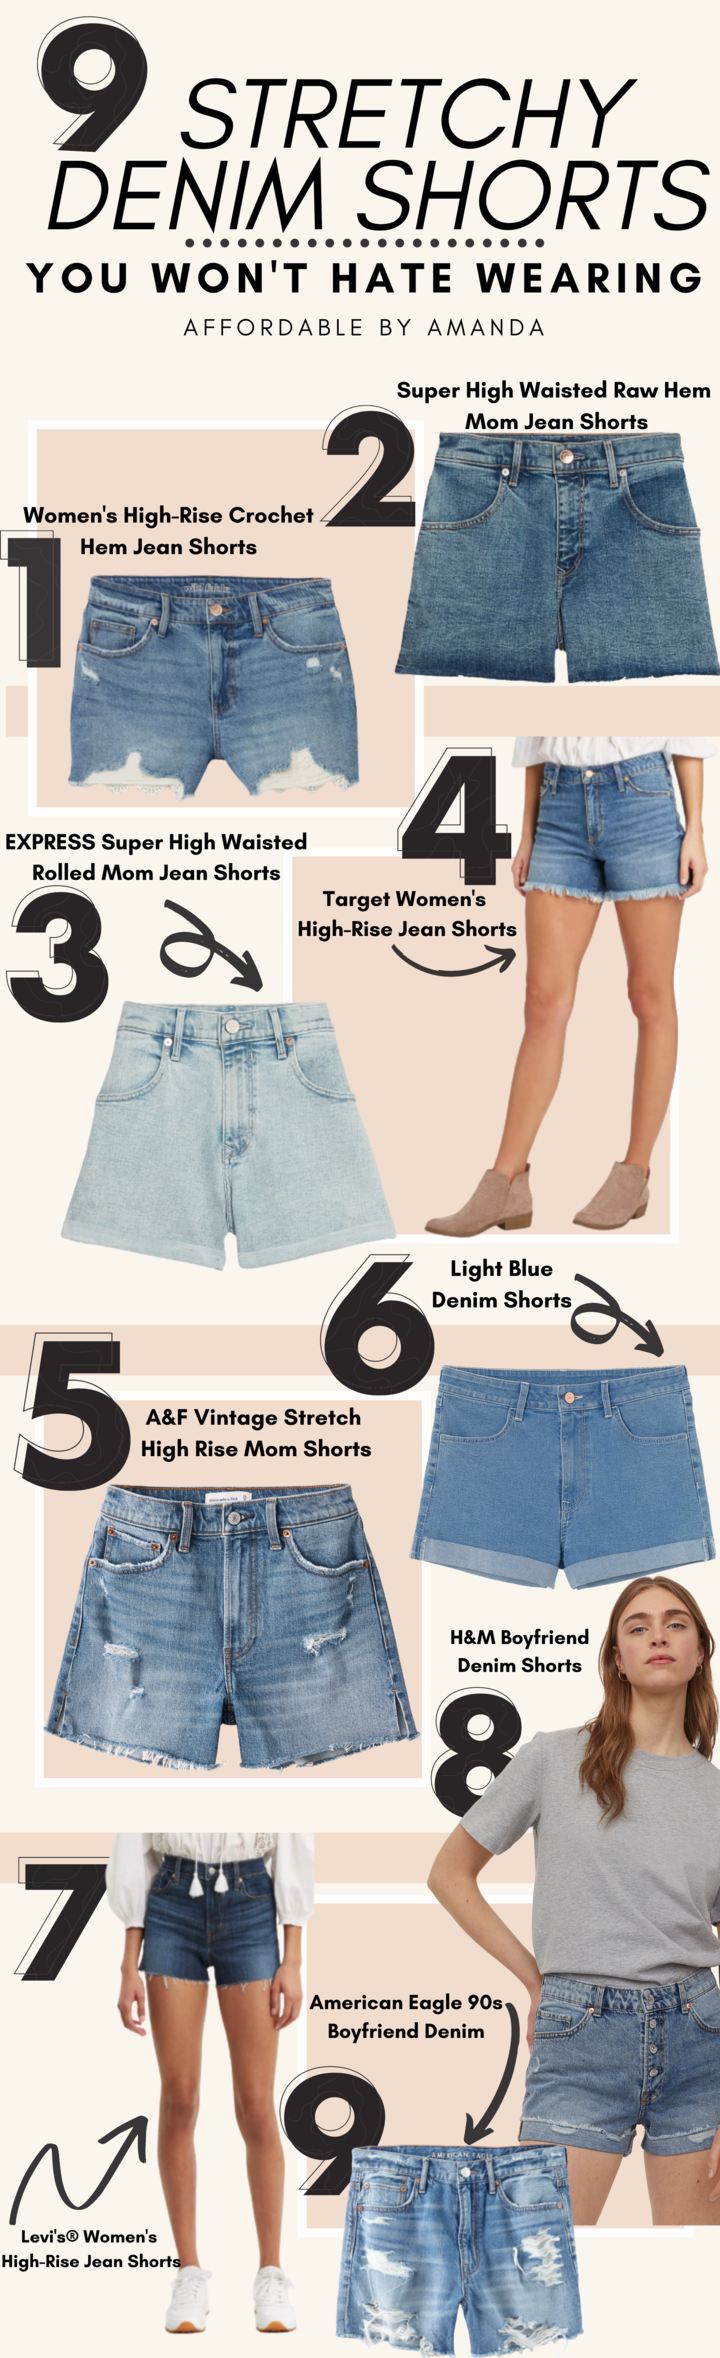 Who makes the best curvy shorts??✨testing Abercrombie Curve Love 